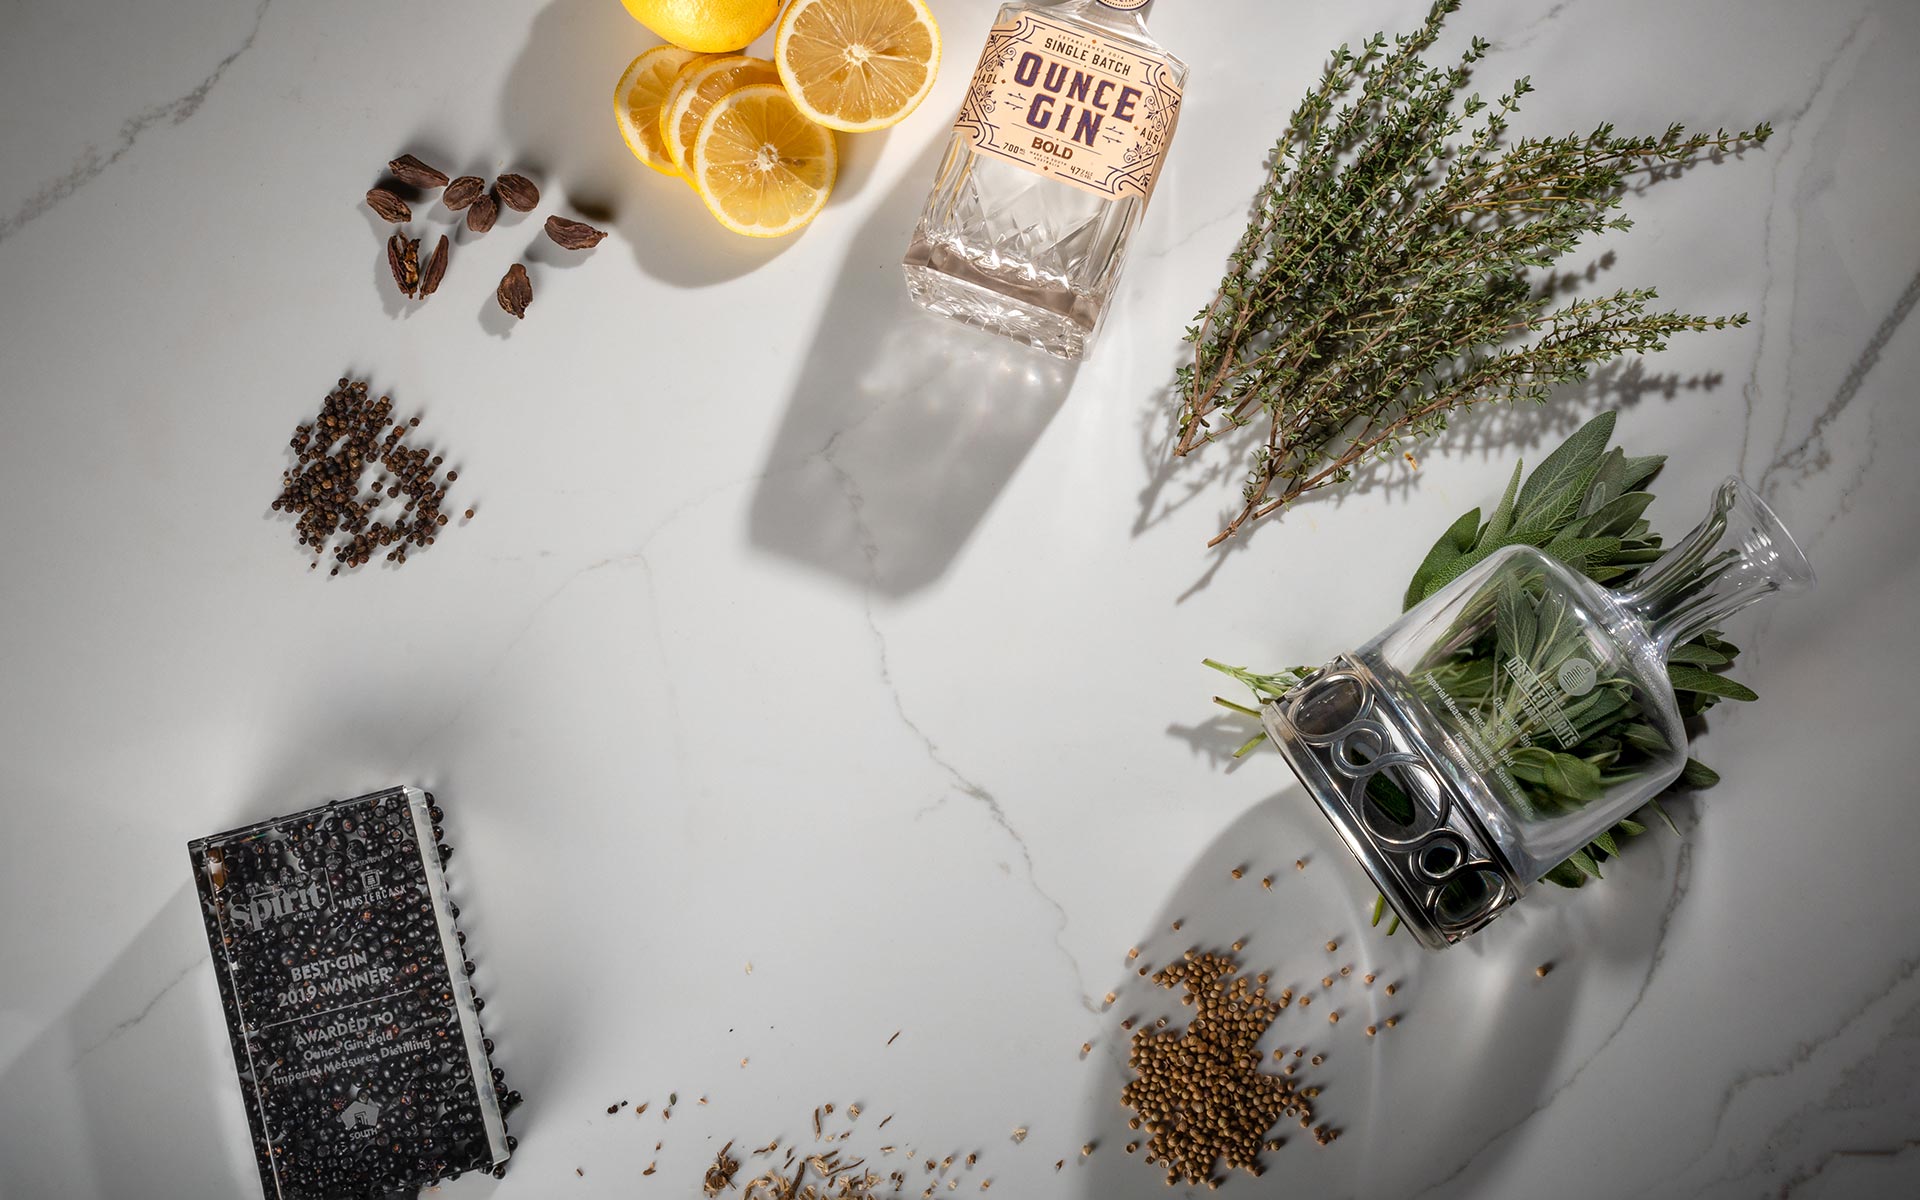 Imperial Measures Ounce Gin - Awards and Botanicals